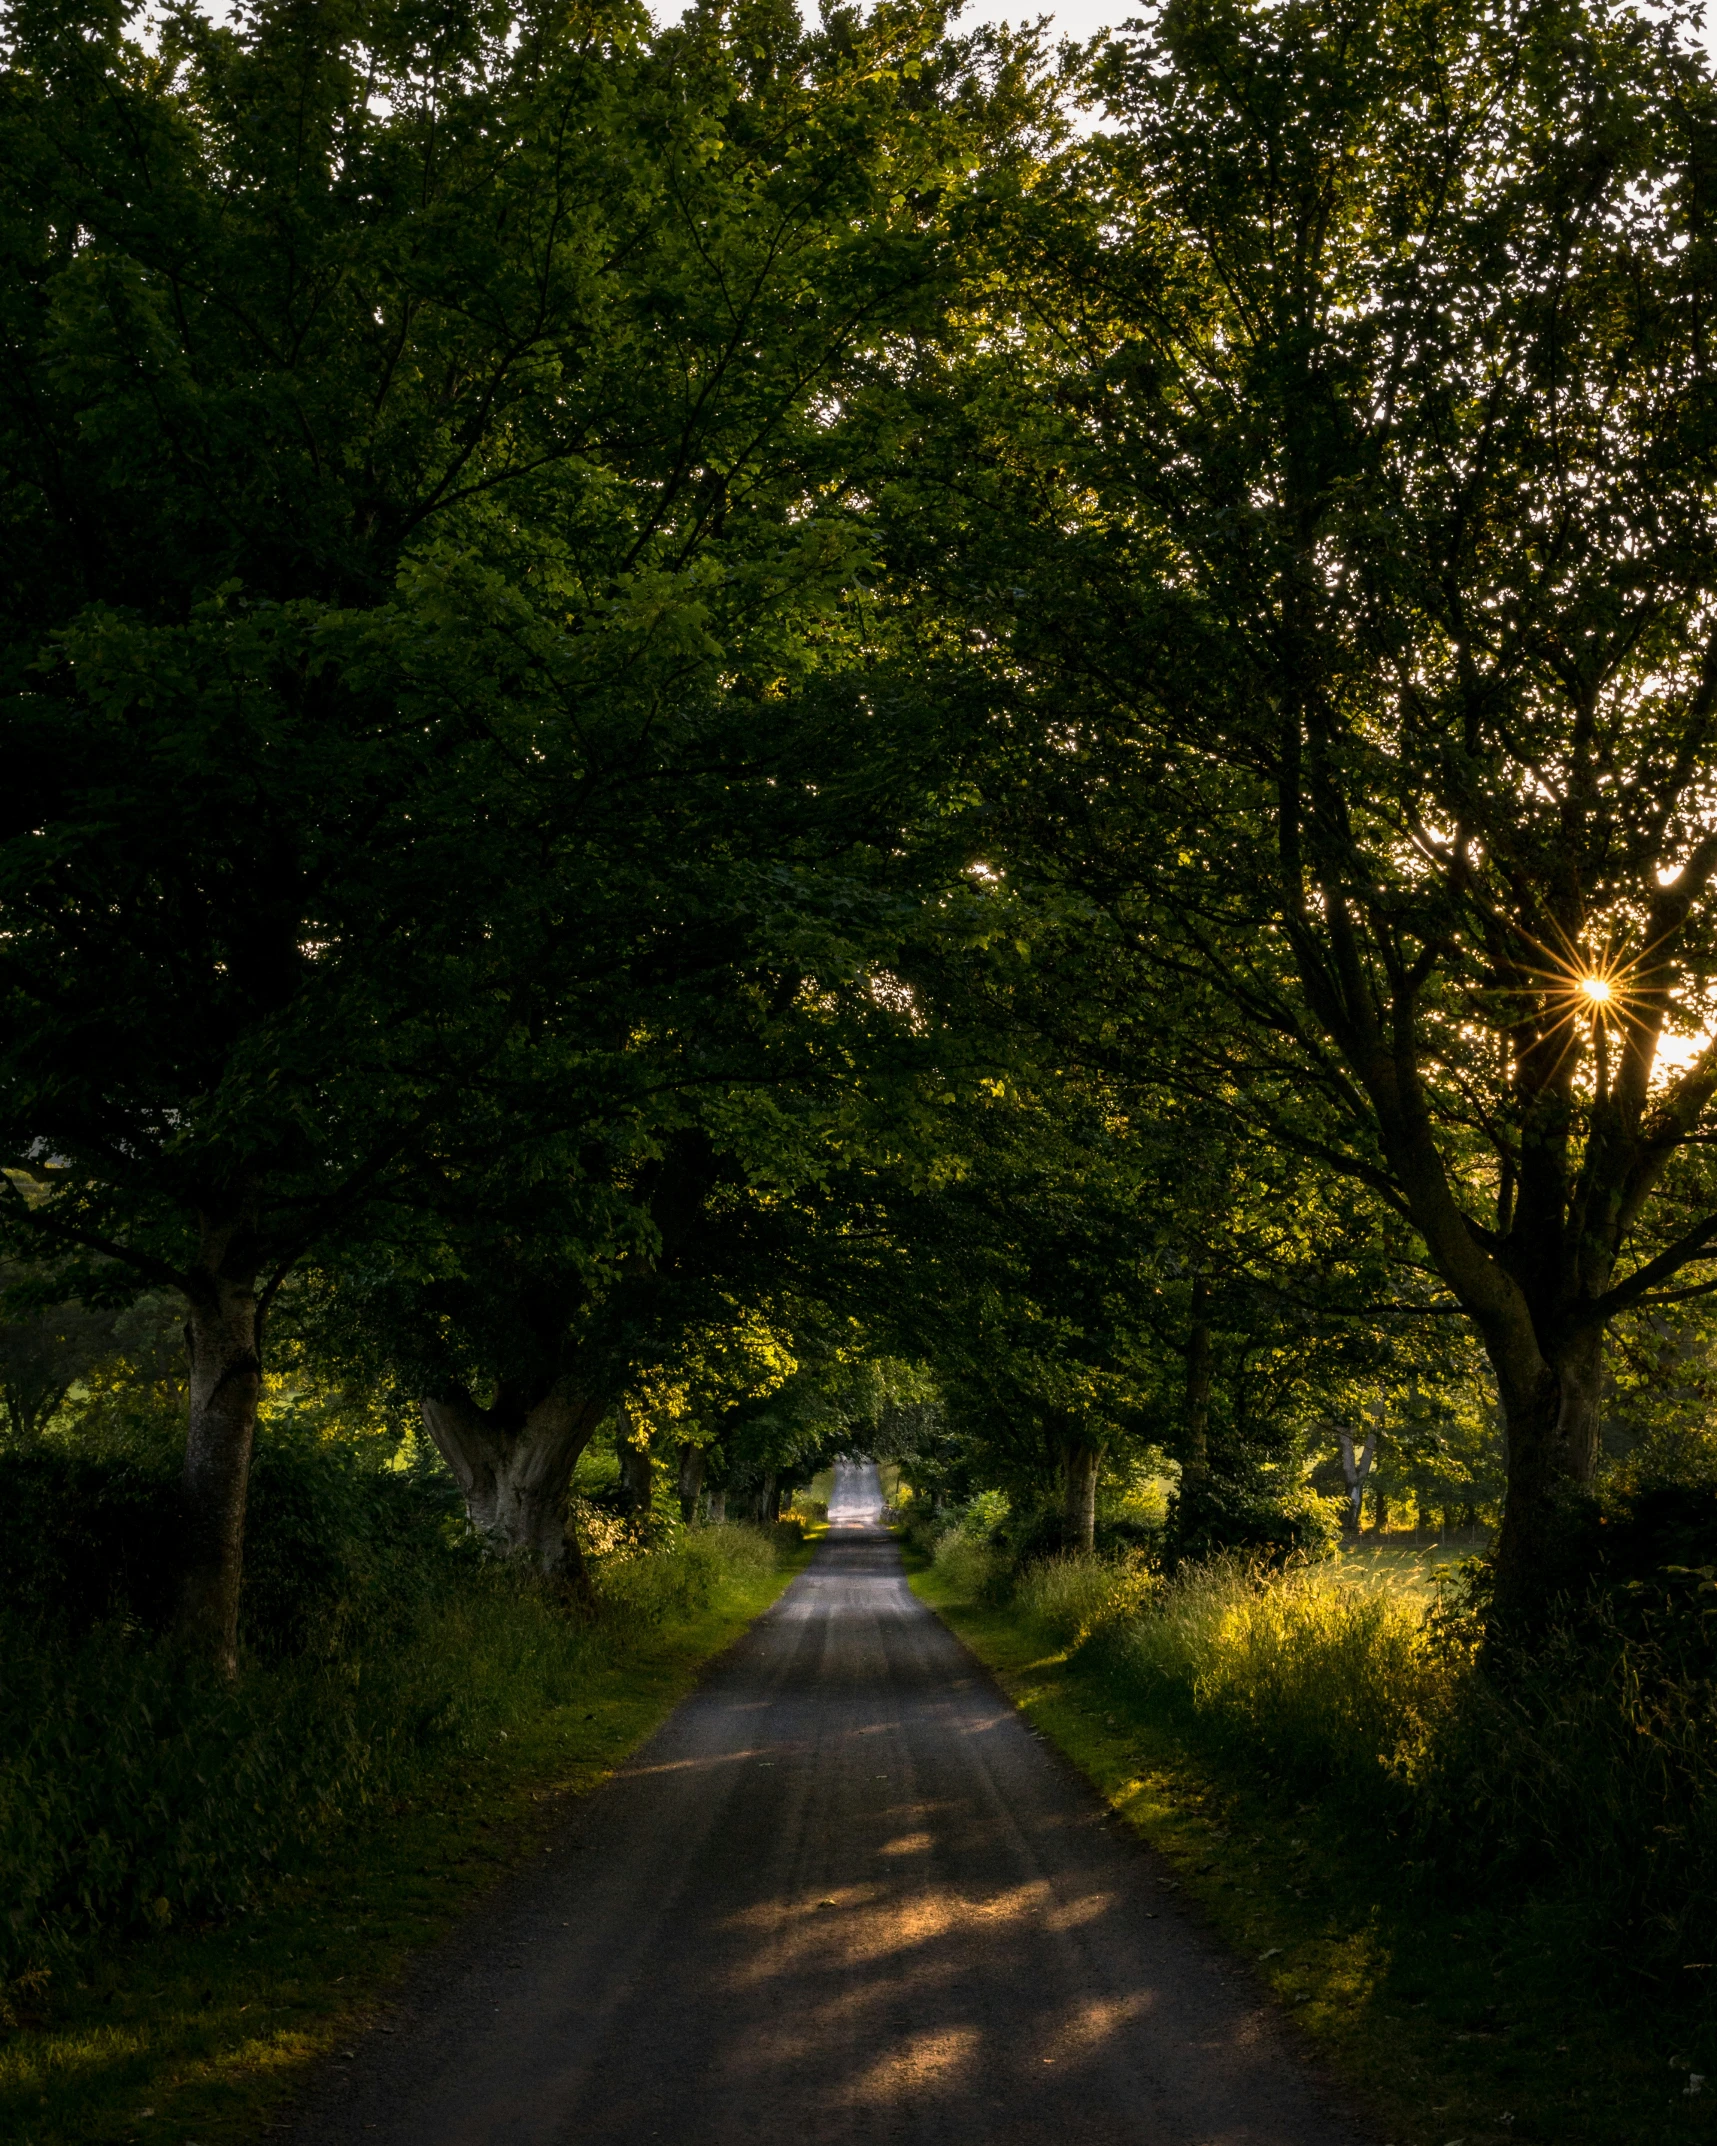 an image of a road surrounded by trees